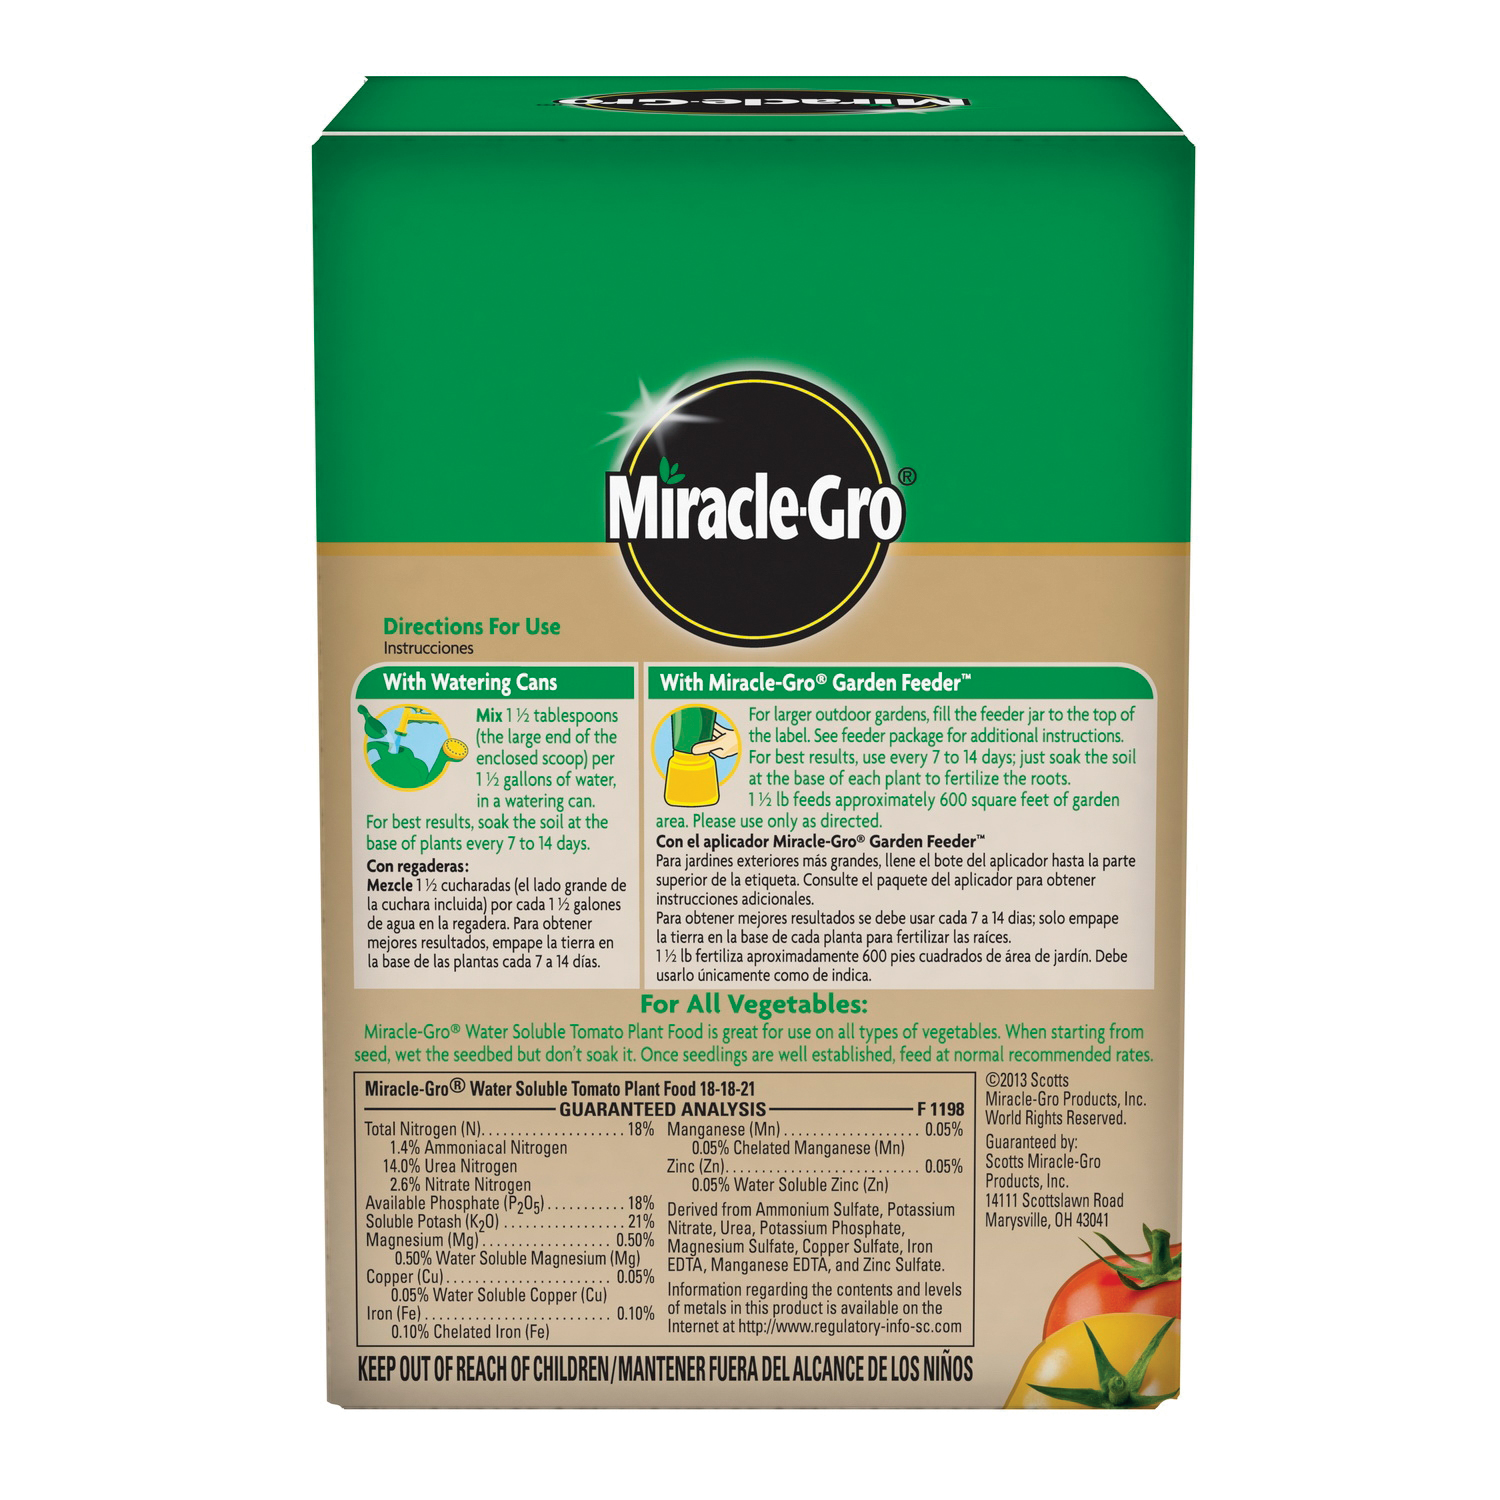 Miracle-Gro 2000422 Plant Food, 1.5 lb Box, Solid, 18-18-21 N-P-K Ratio - 5